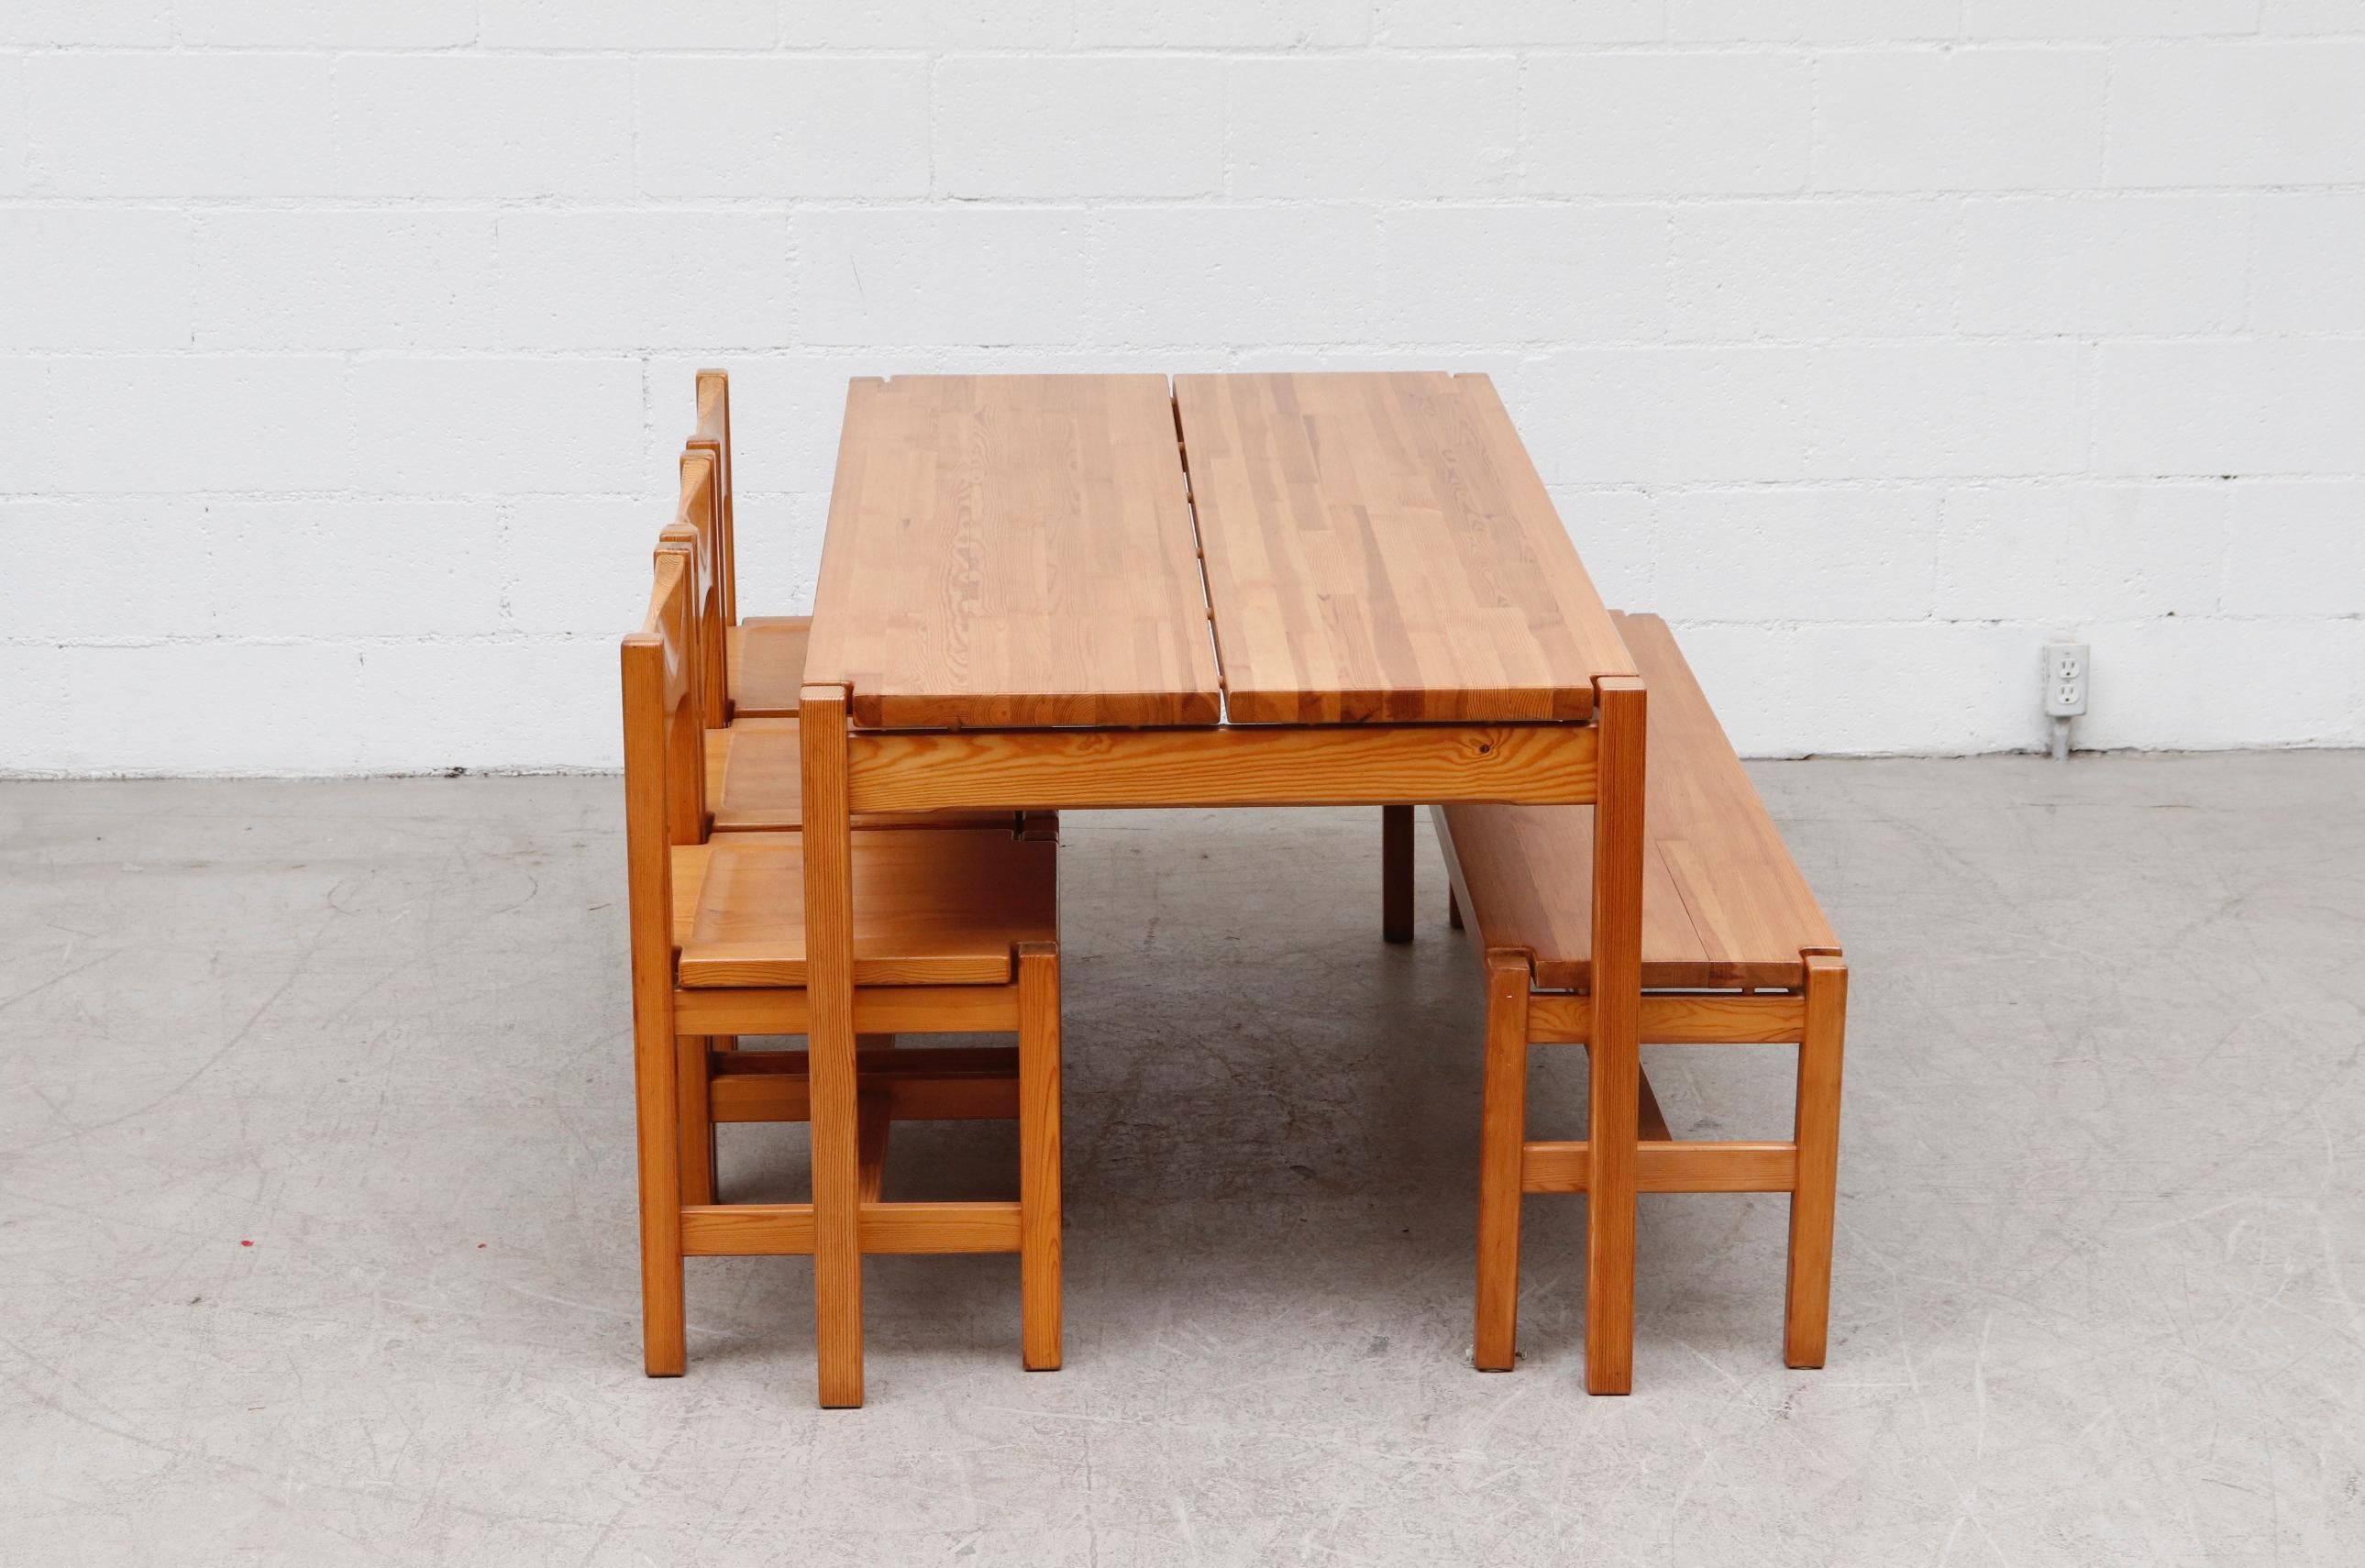 Finnish Tapiovaara Pine Dining Set with Bench and 3 Chairs